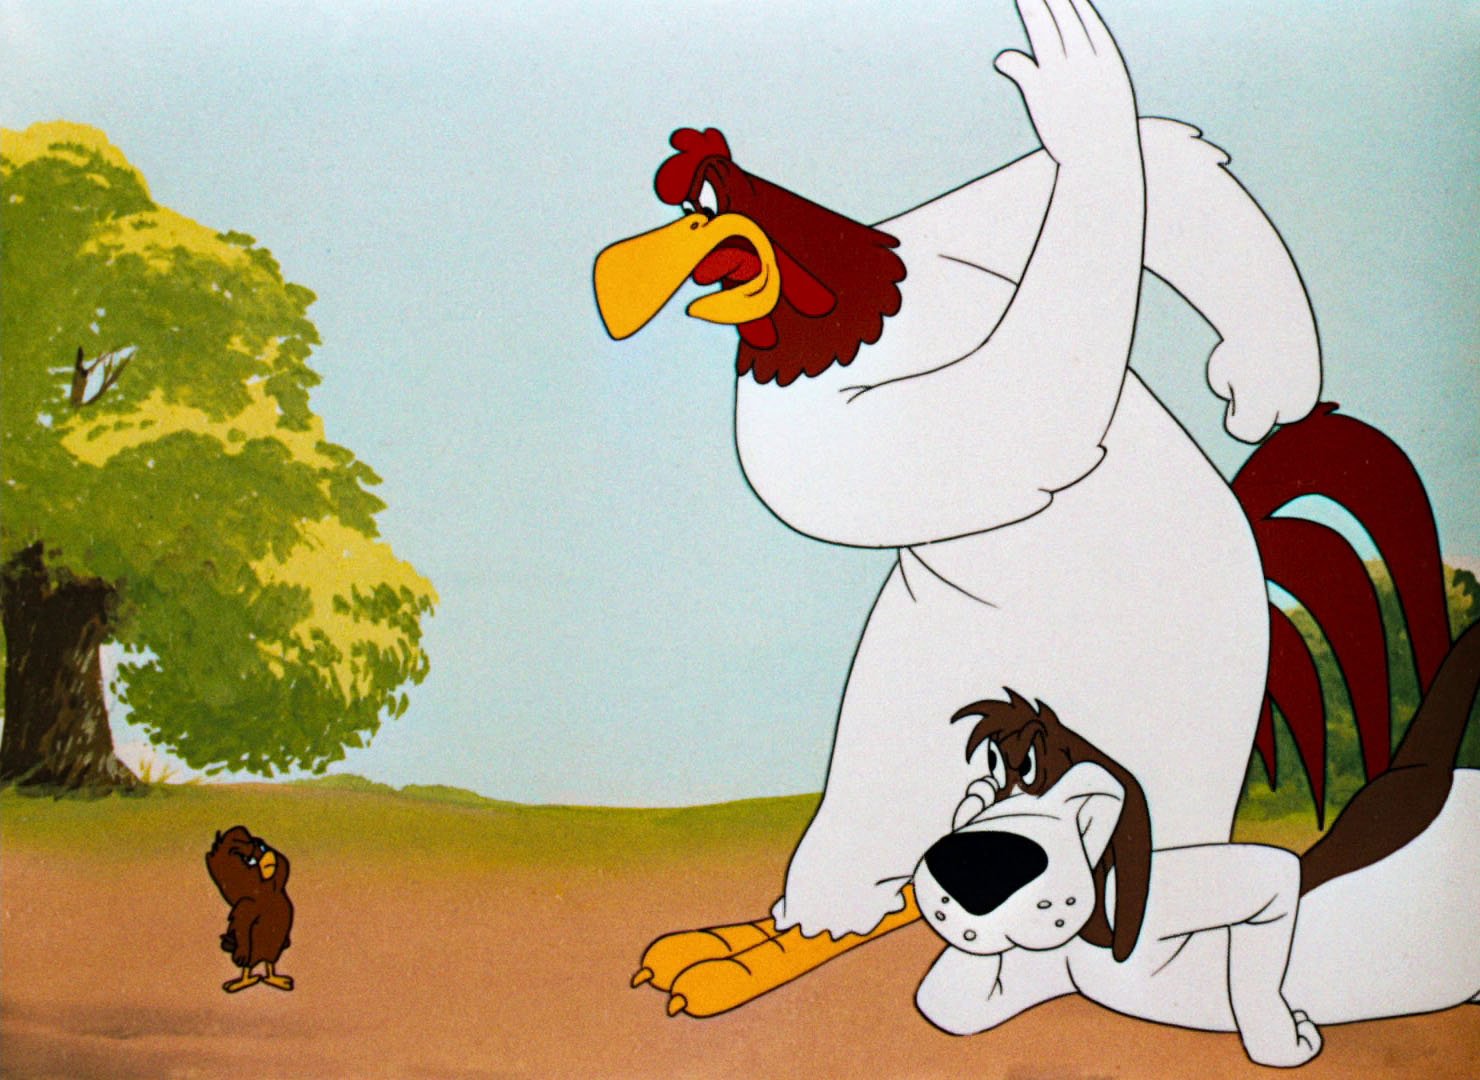 foghorn leghorn Wallpaper and Background Image 1480x1080 ID437970